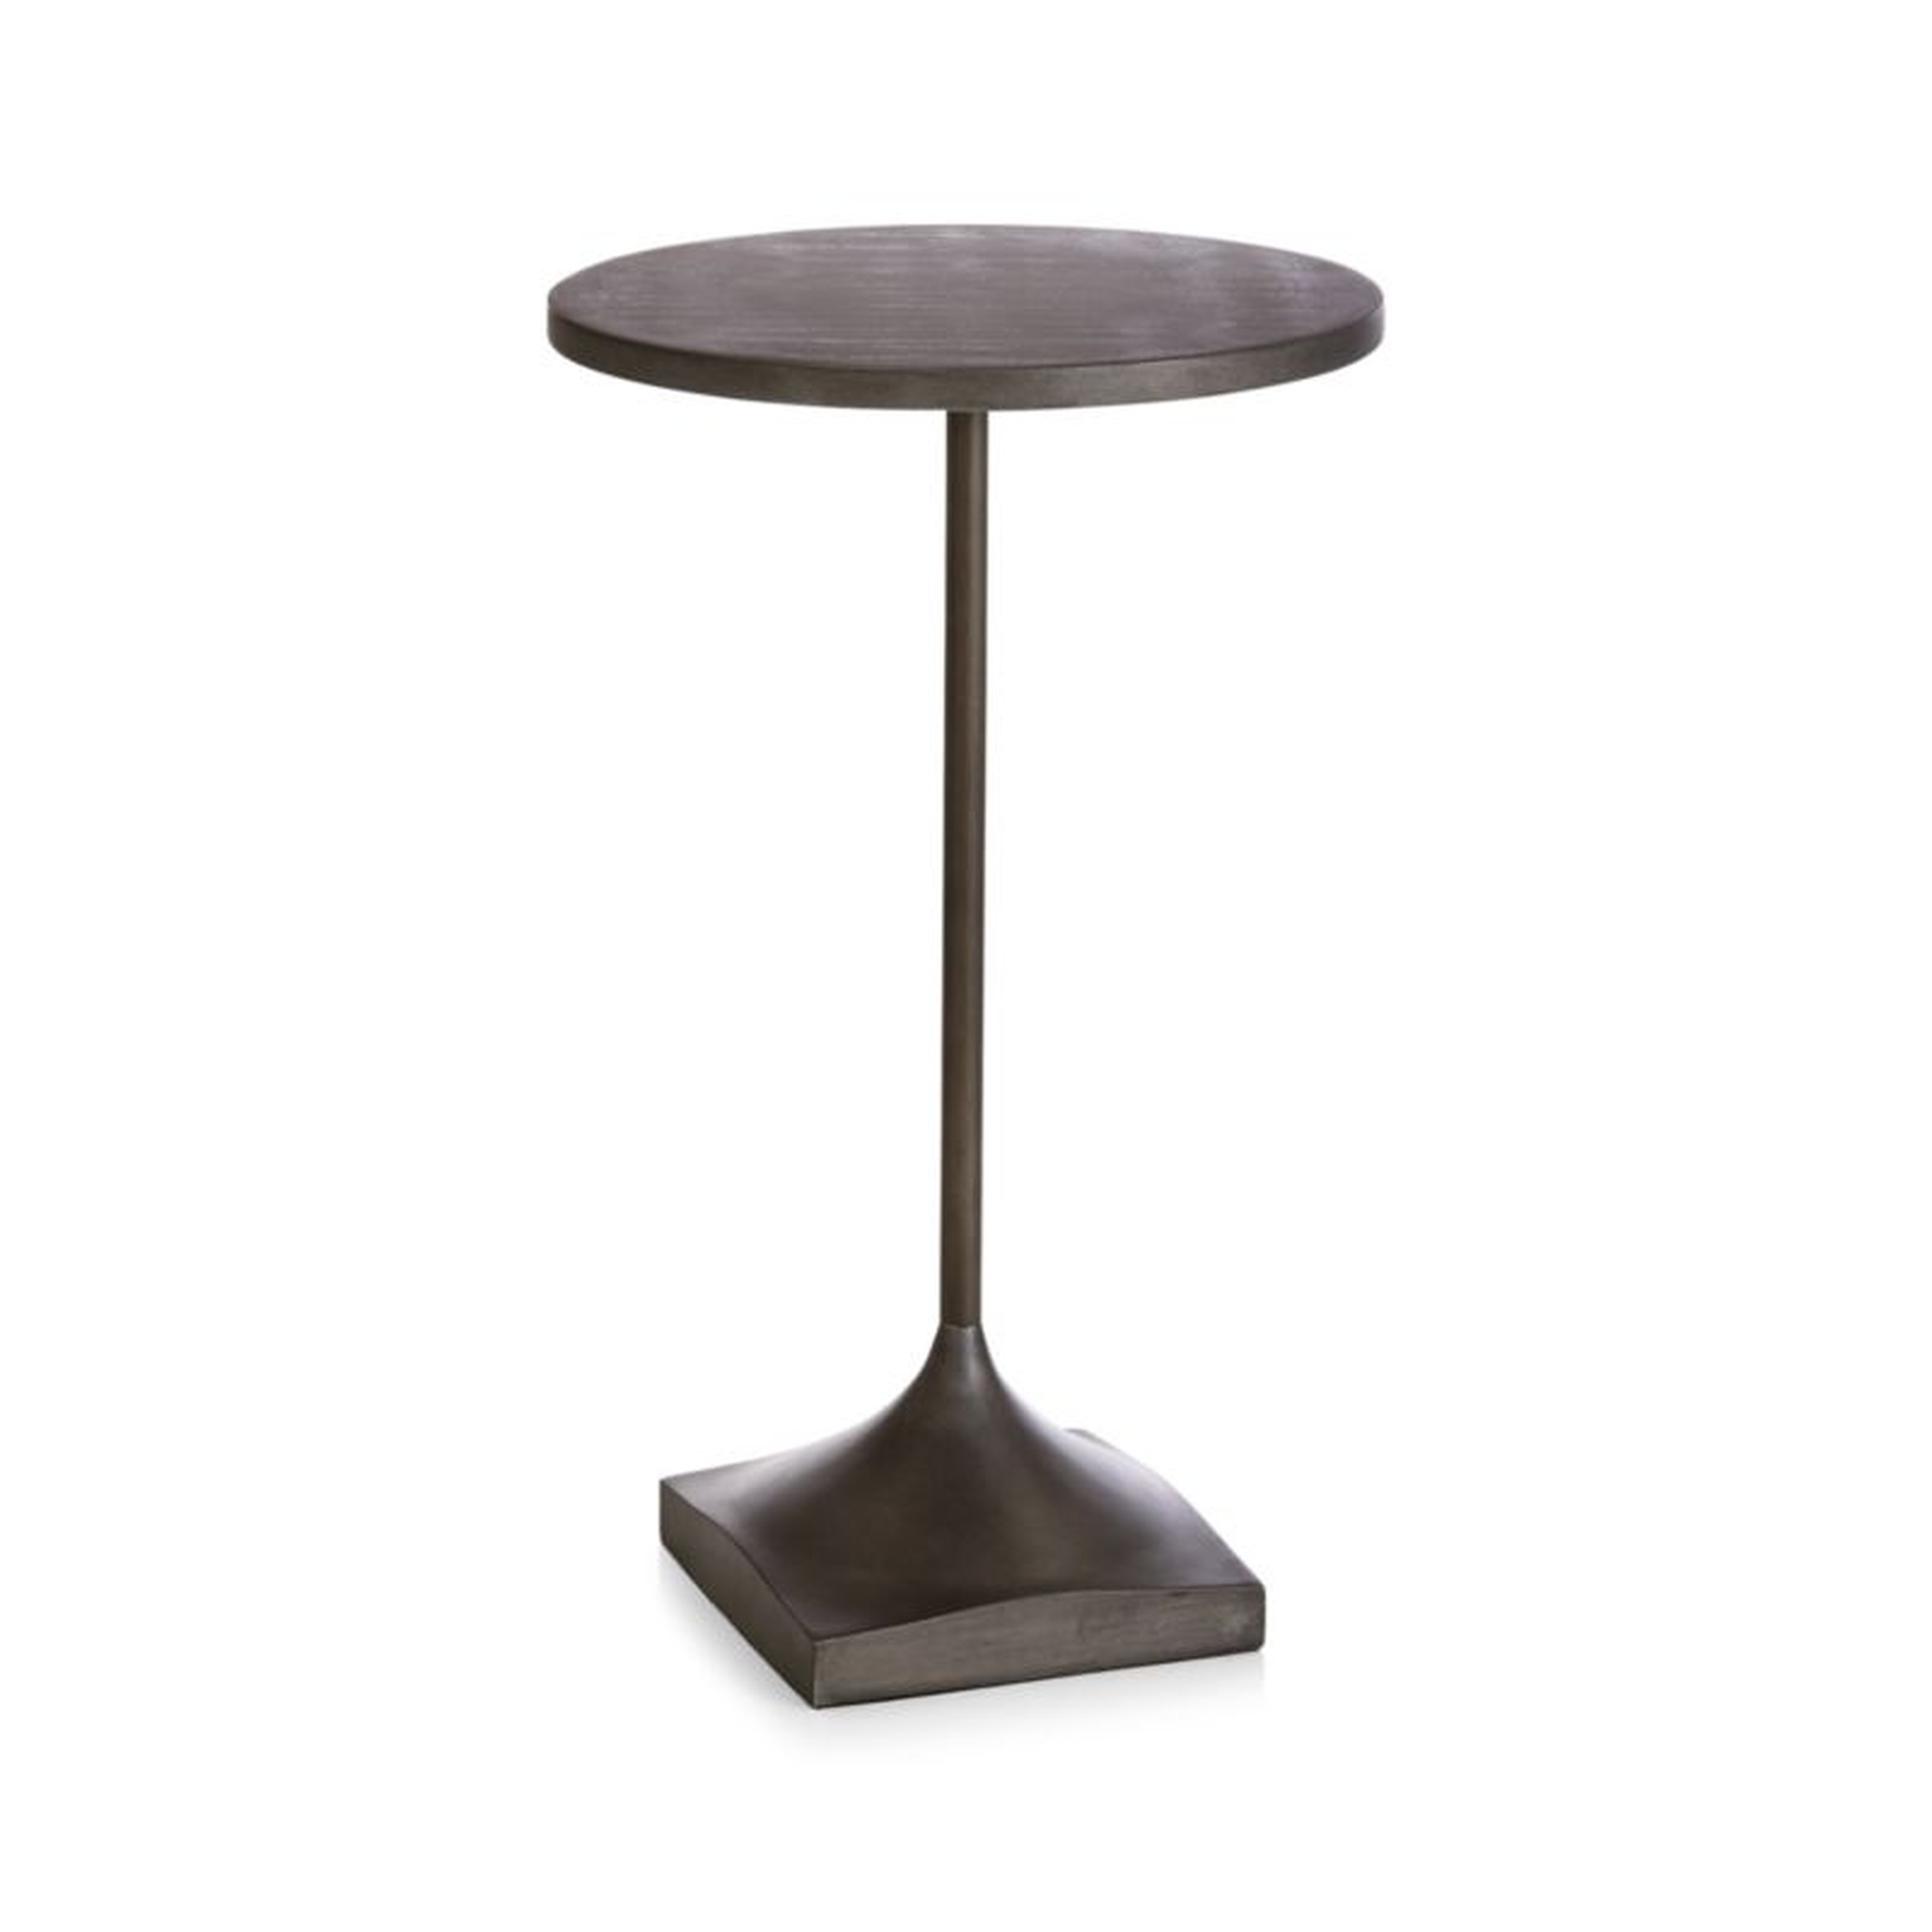 Prost Small Metal Round Drink Table - Crate and Barrel